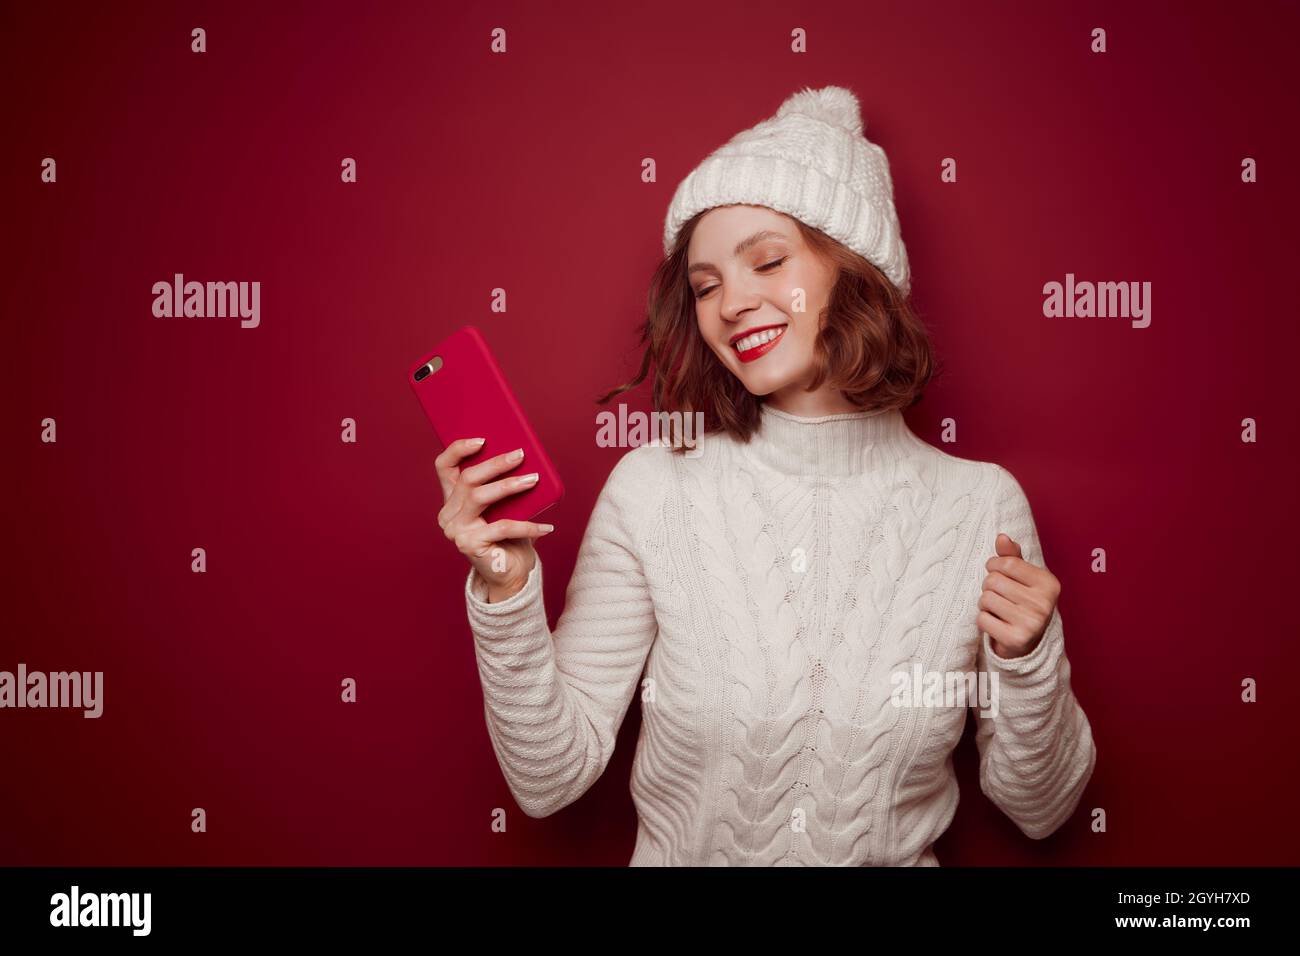 Happy smiling woman in sweater hold phone Stock Photo